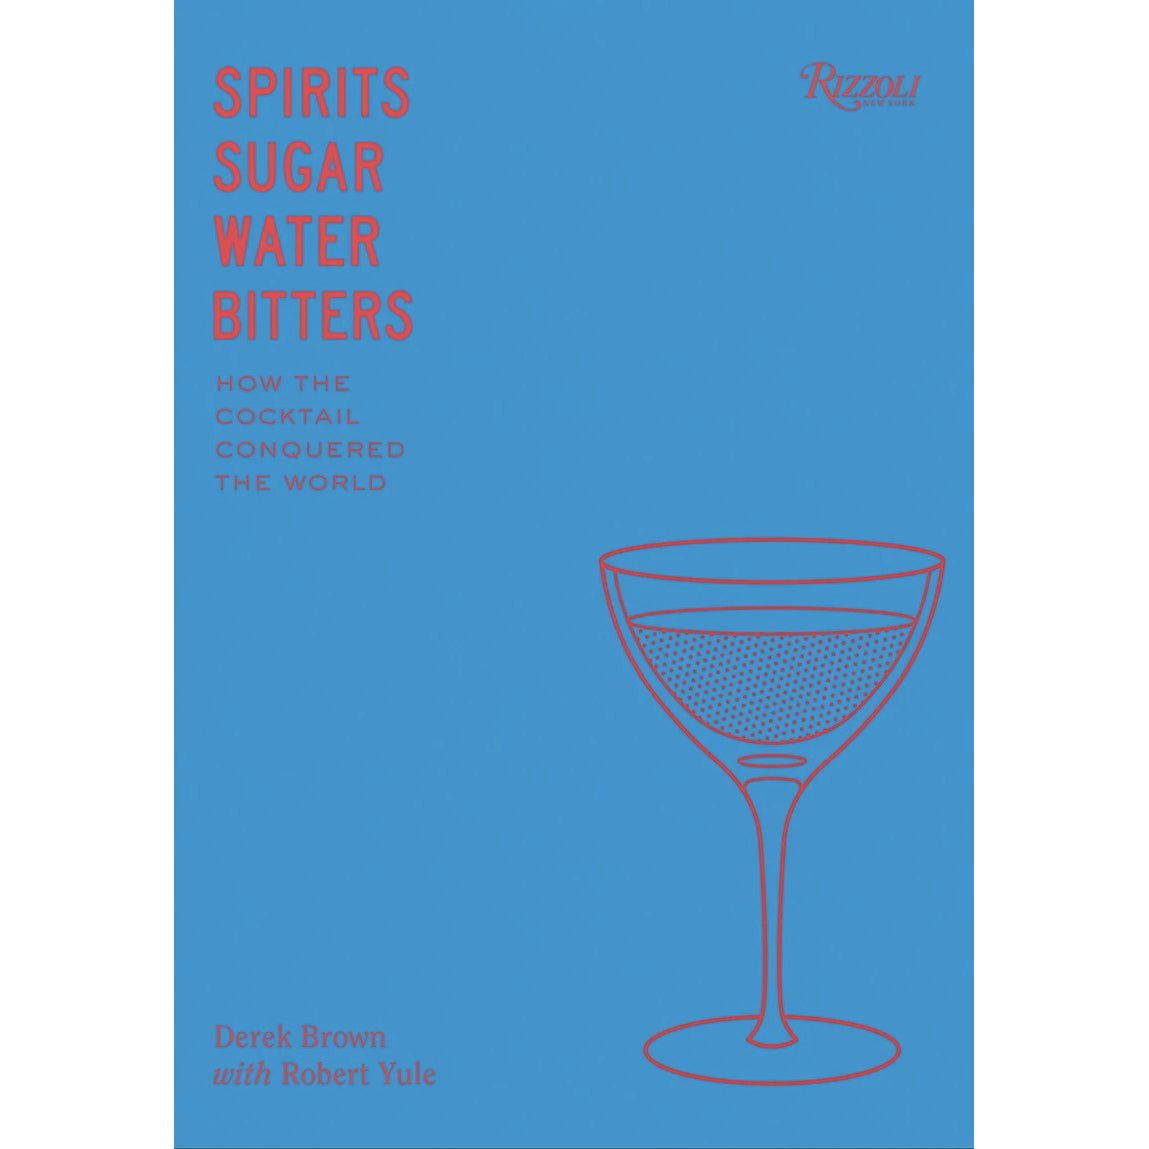 Spirits, Sugar, Water, Bitters: How the Cocktail Conquered the World